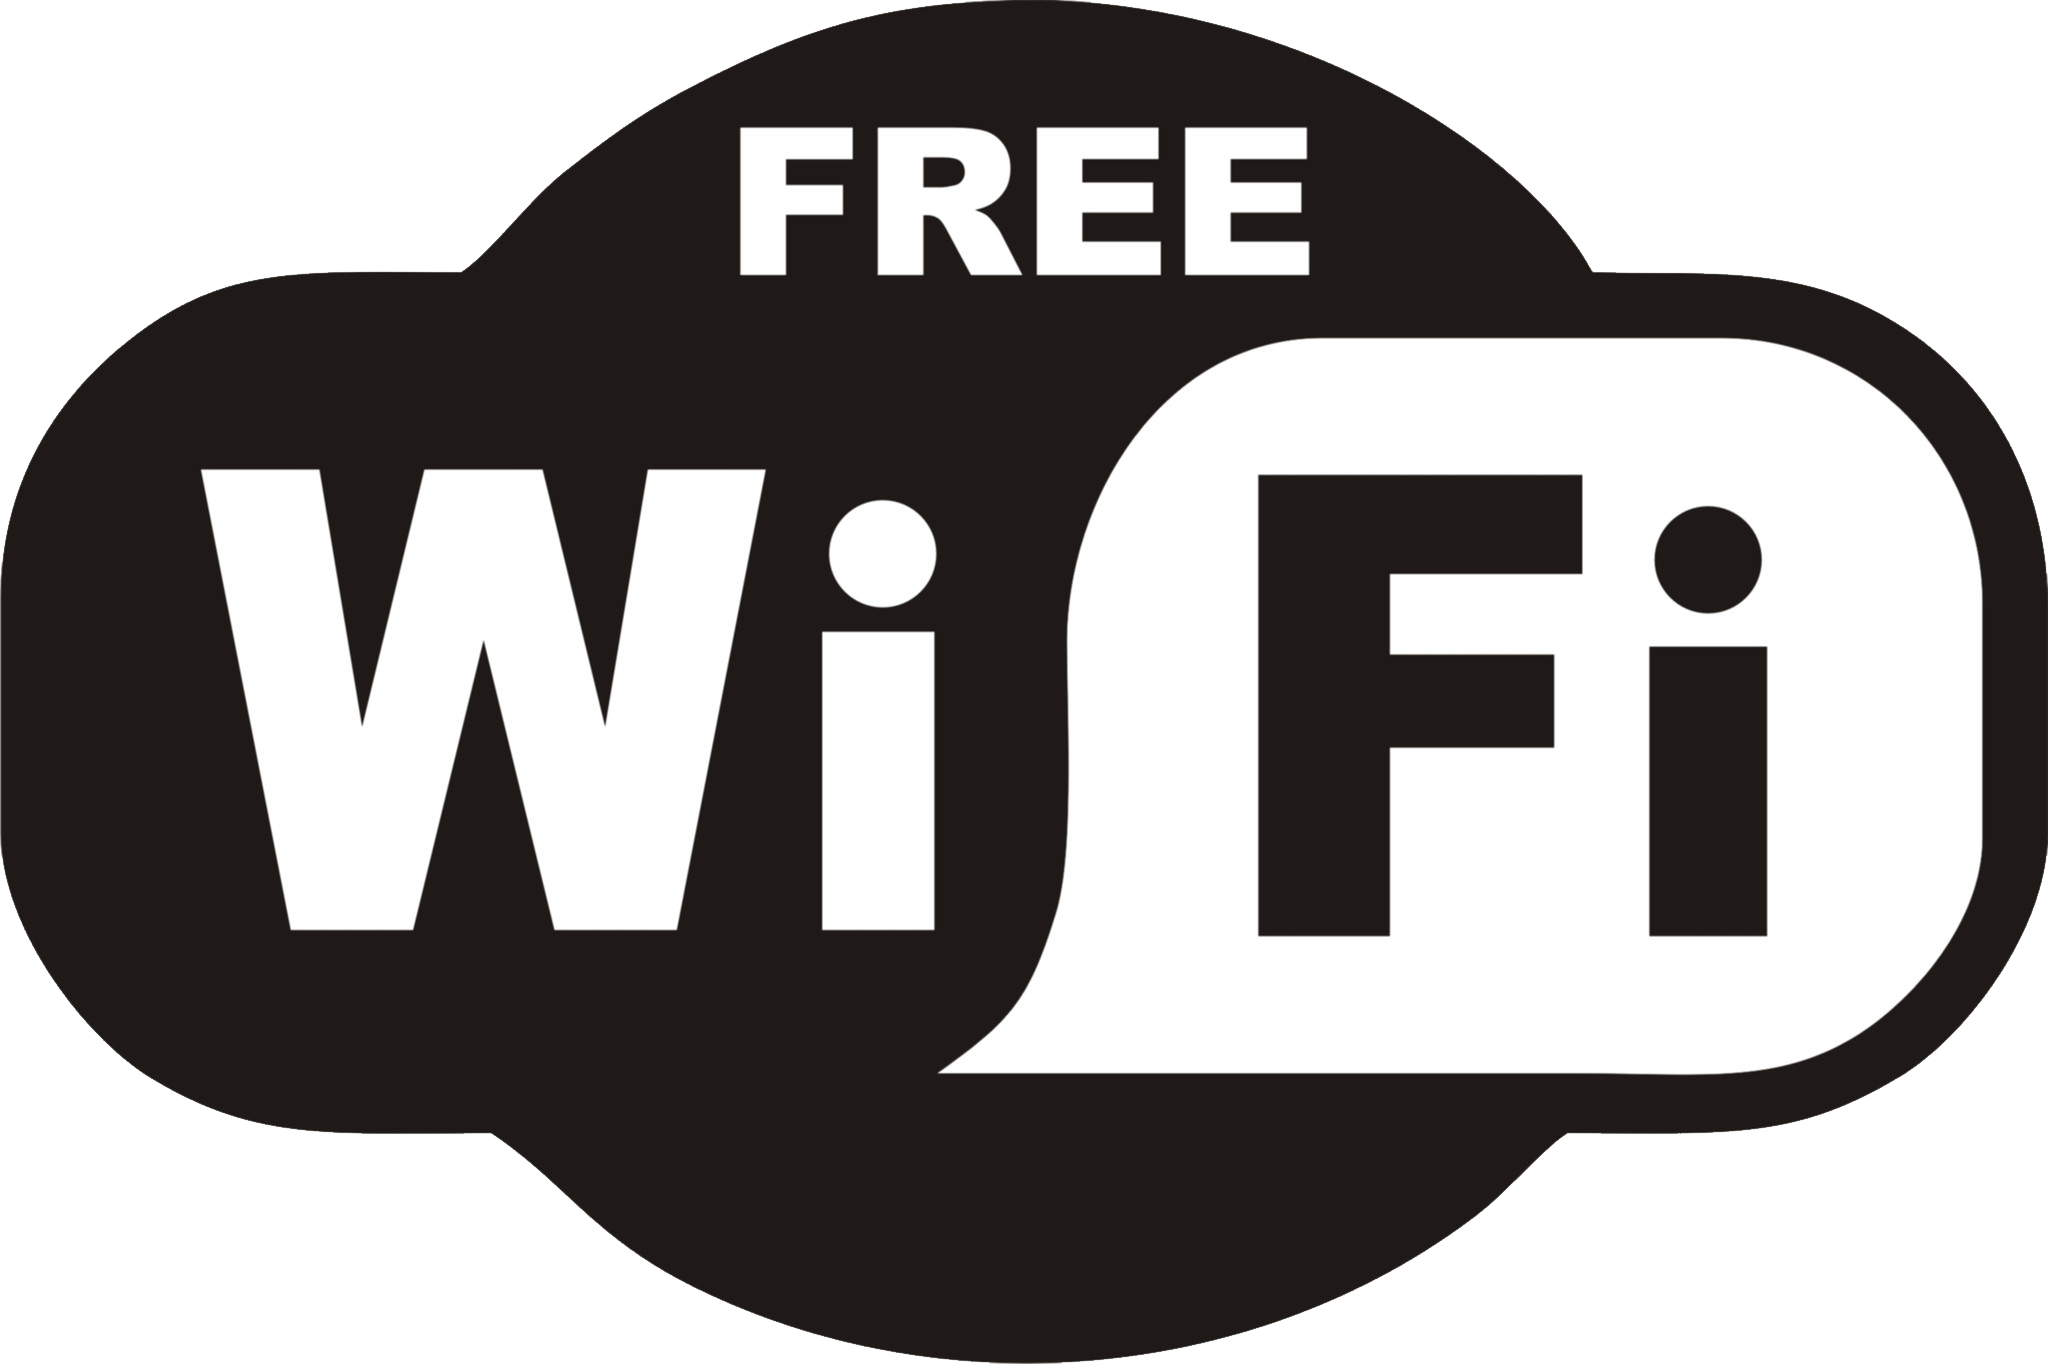 Free WiFi Grátis PNG HQ Image